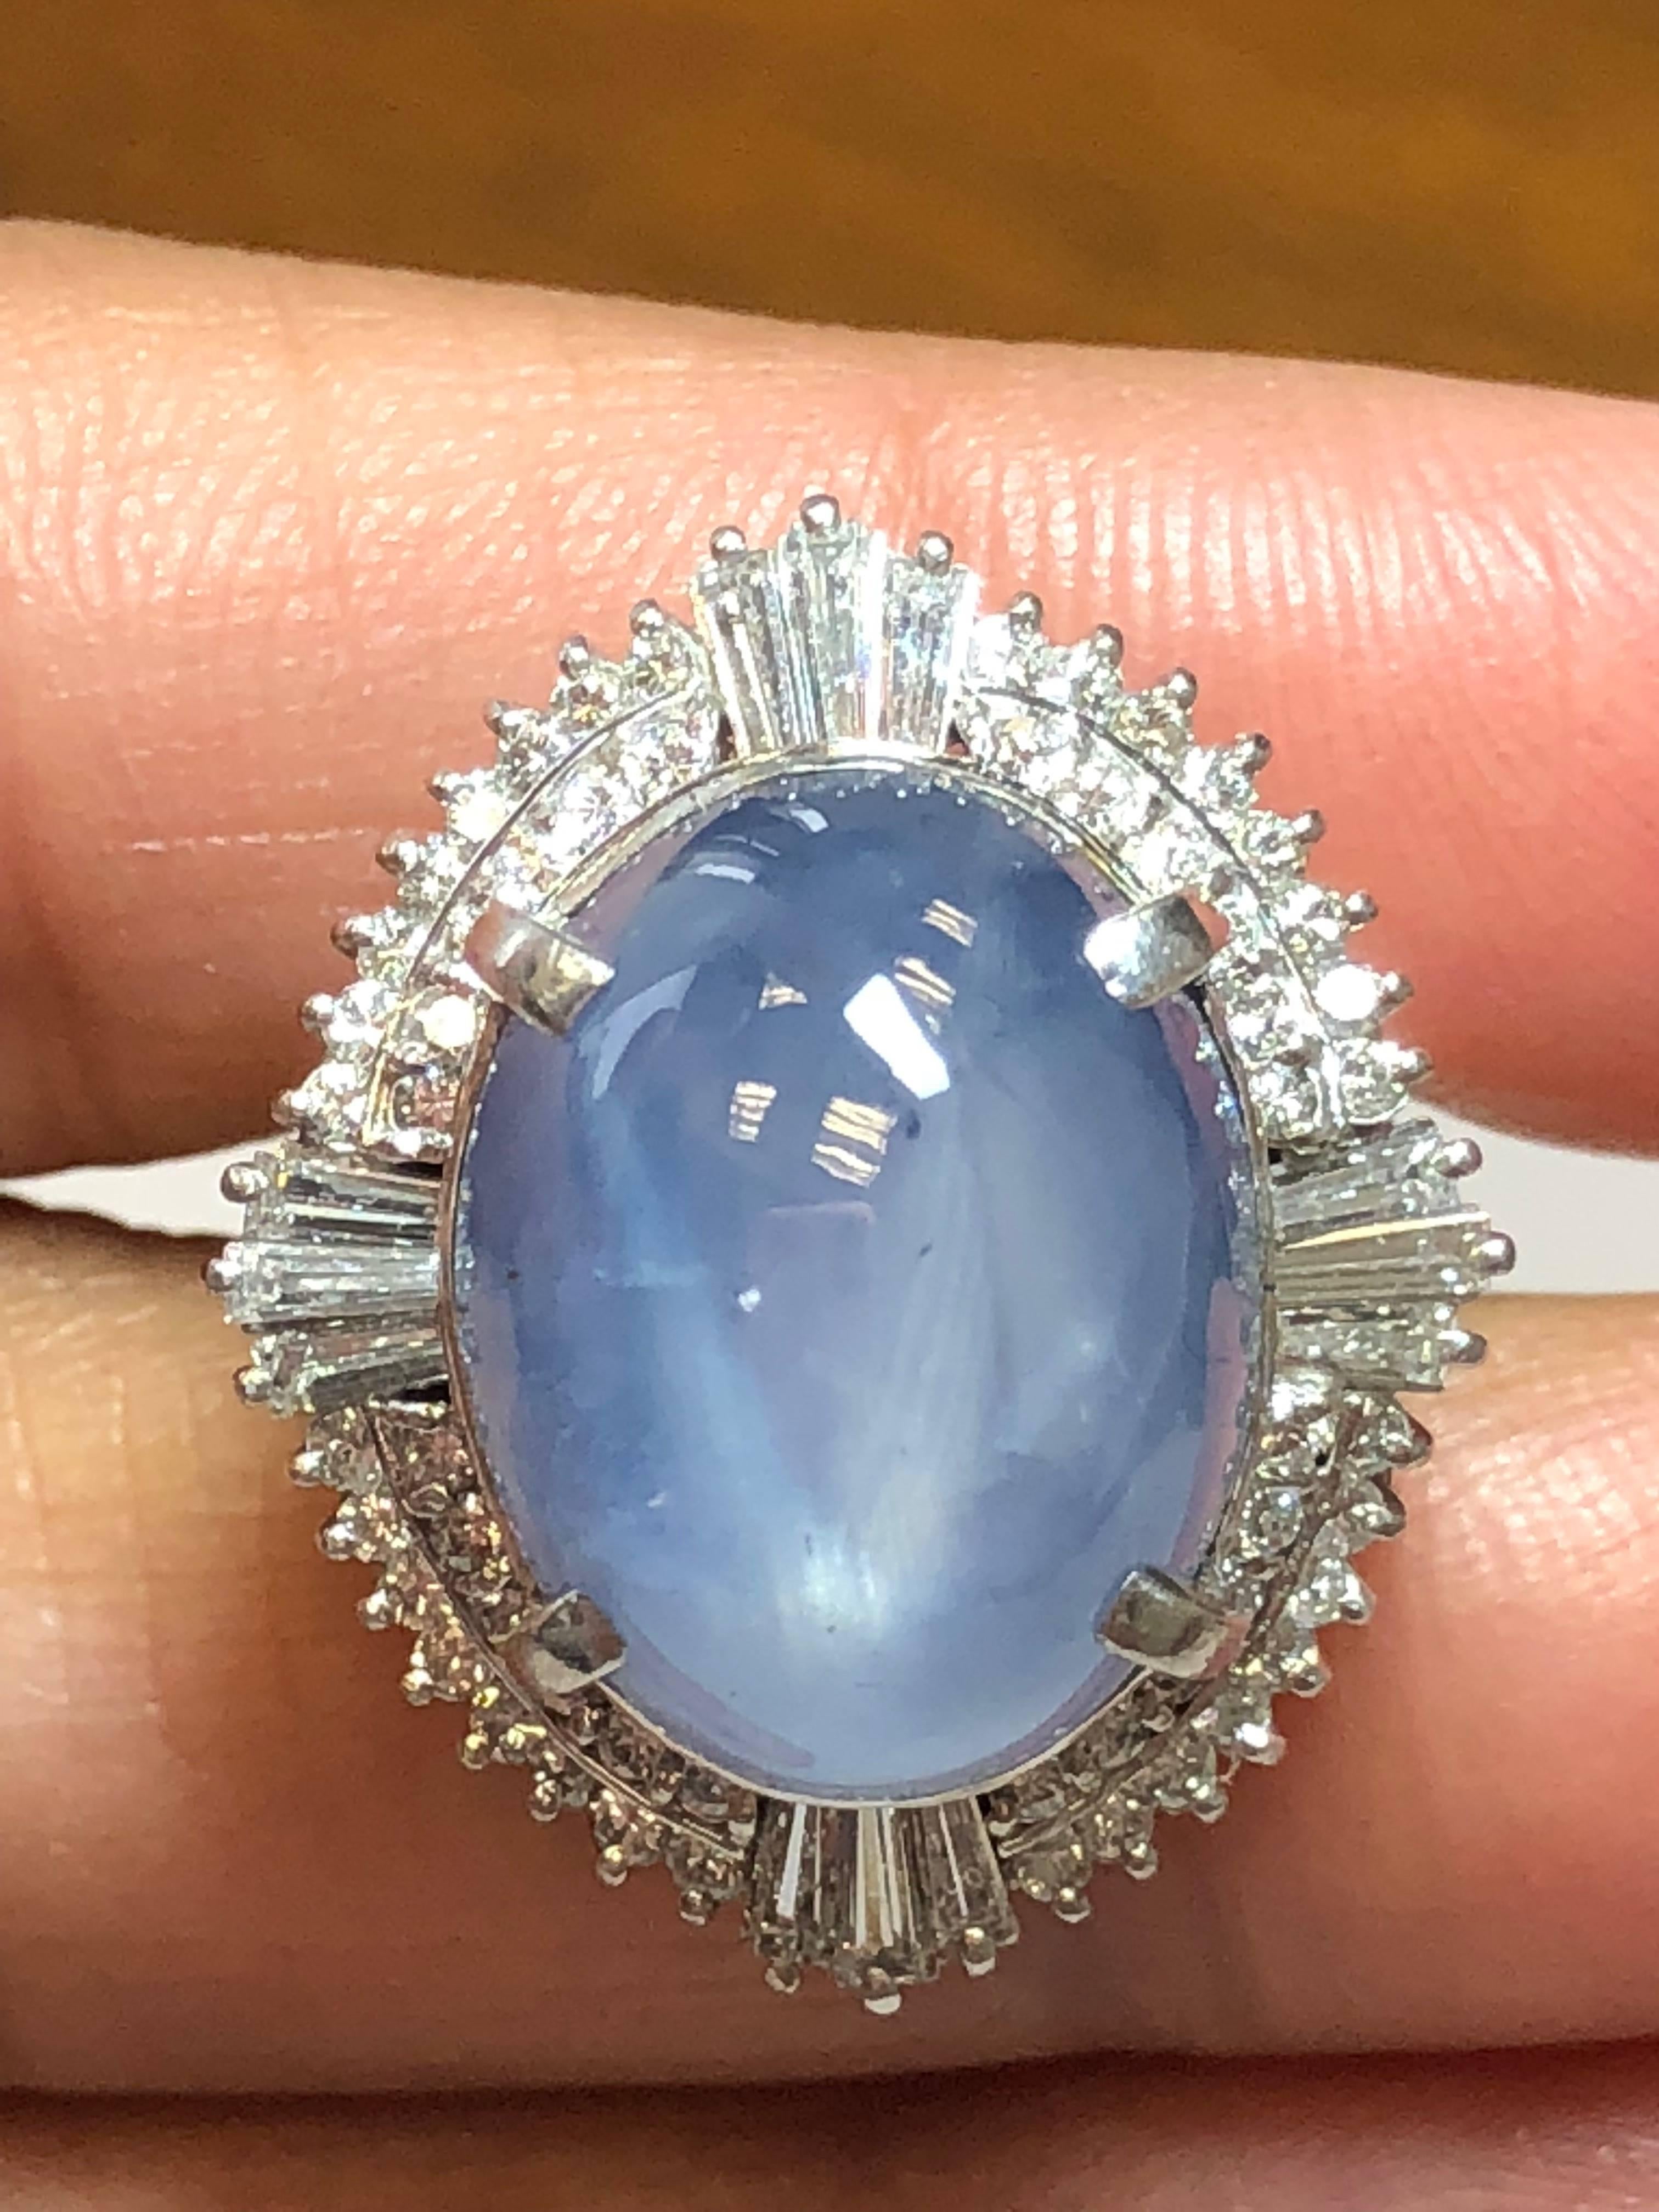 Gorgeous 26.12 carat of blue star sapphire cabochon surrounded by 1.21 carats of brilliant white diamonds in a platinum mounting size 5.5.  This cocktail ring showcases a dreamy blue color with a strong star.  A showstopper piece that is perfect for